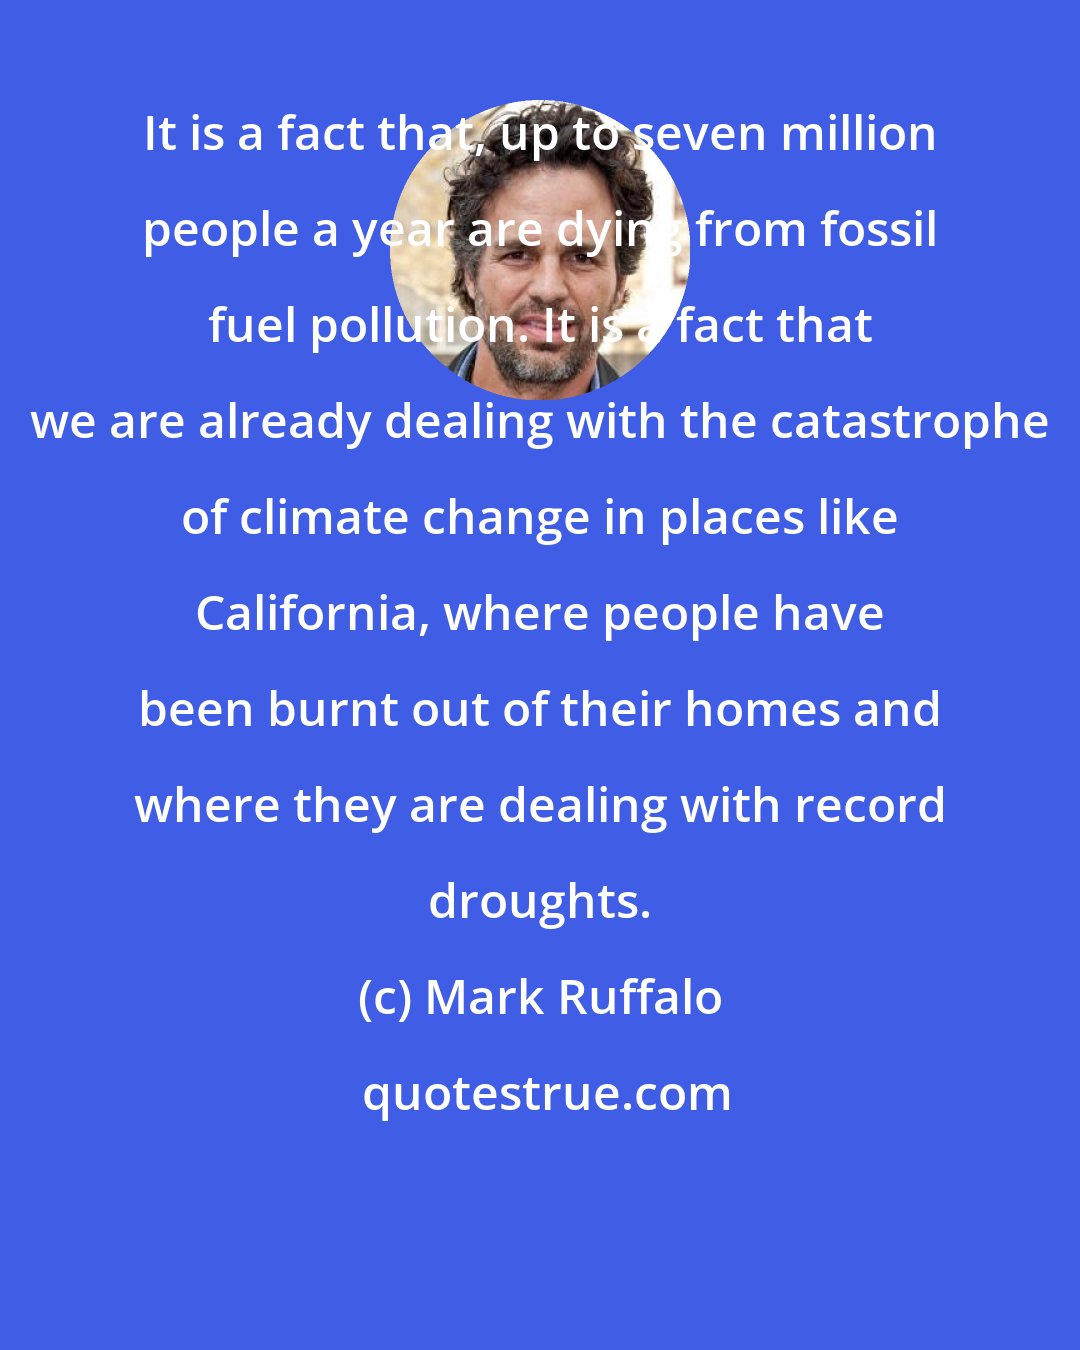 Mark Ruffalo: It is a fact that, up to seven million people a year are dying from fossil fuel pollution. It is a fact that we are already dealing with the catastrophe of climate change in places like California, where people have been burnt out of their homes and where they are dealing with record droughts.